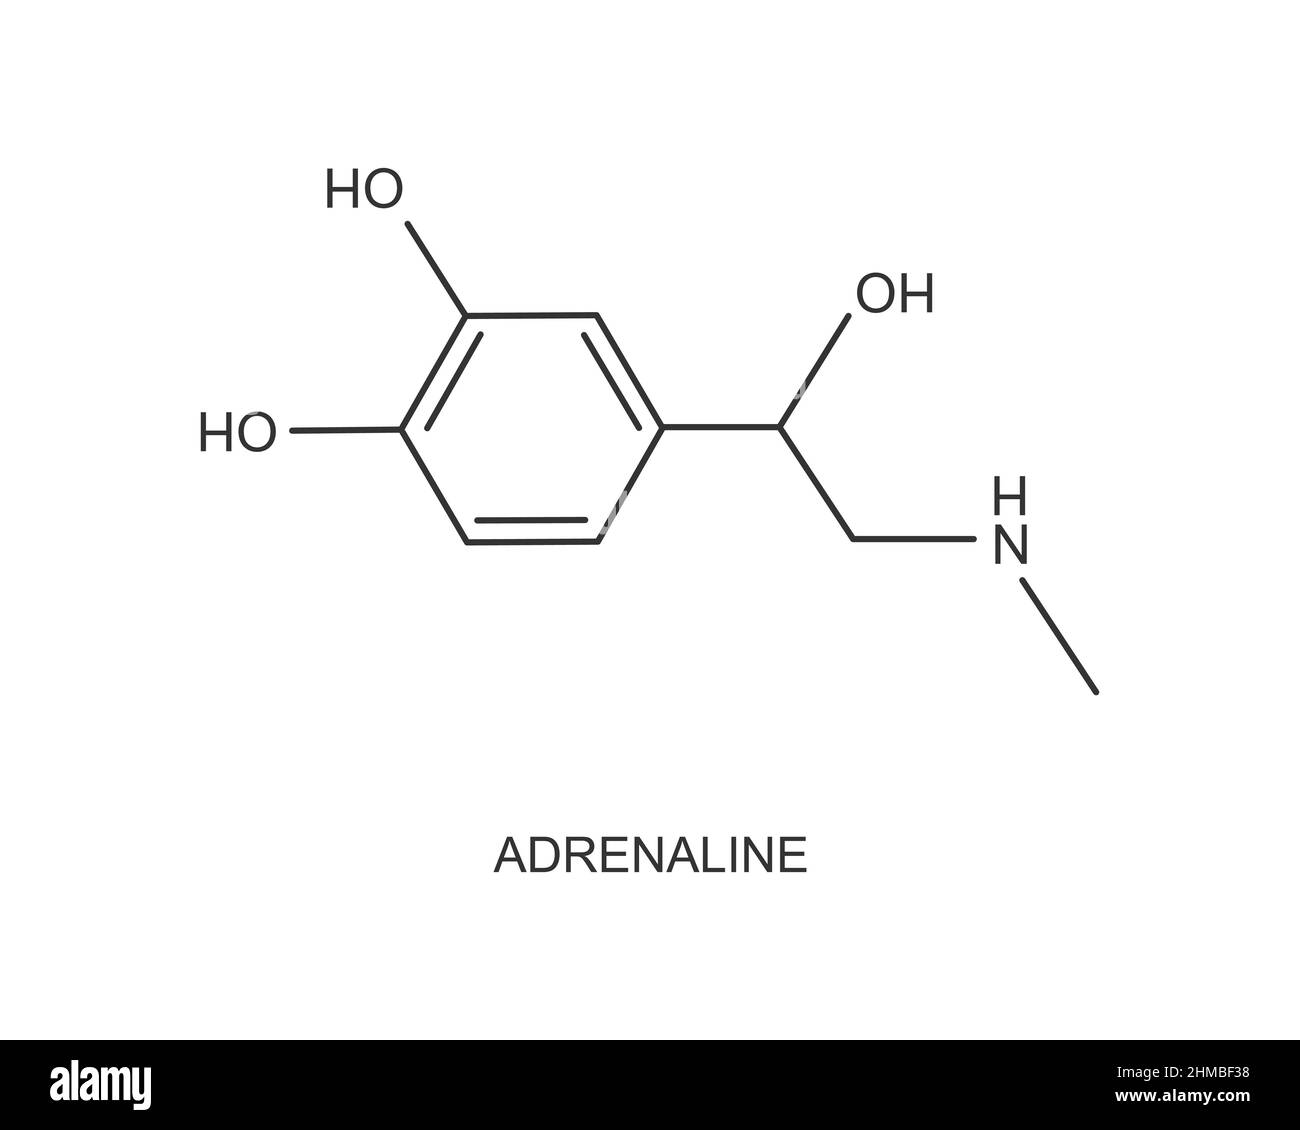 Adrenaline icon. Epinephrine hormone produced by the adrenal gland. Chemical molecular structure. Vector outline illustration. Stock Vector